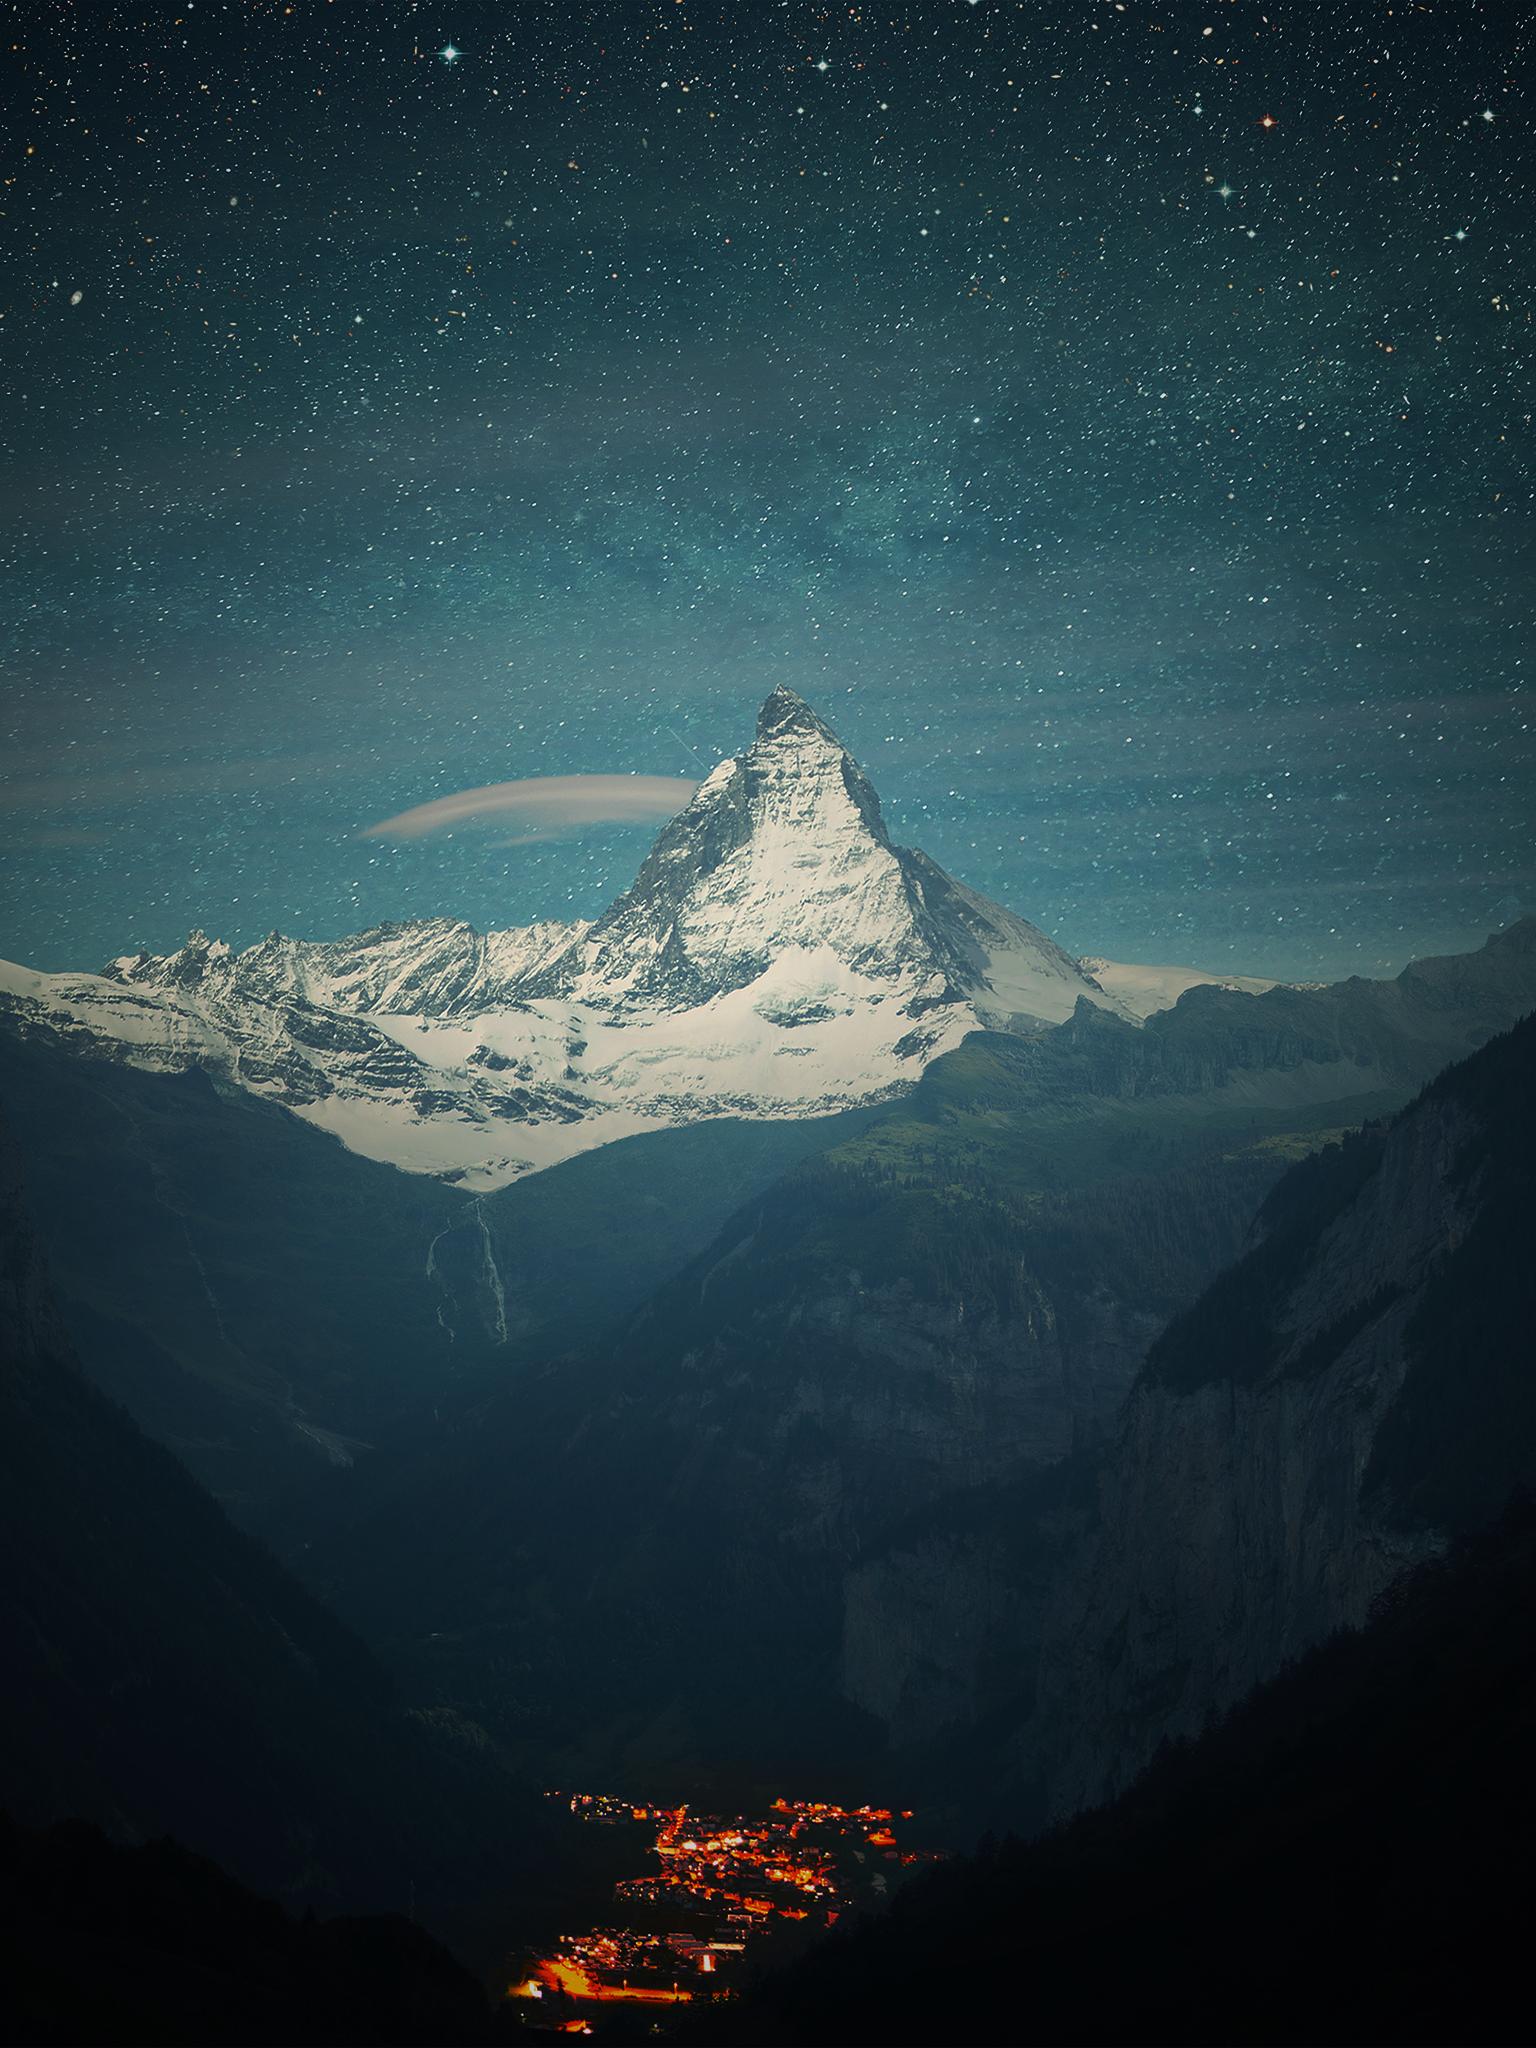 Valley of the Stars. [1920x1080] (5 other resolutions including ...